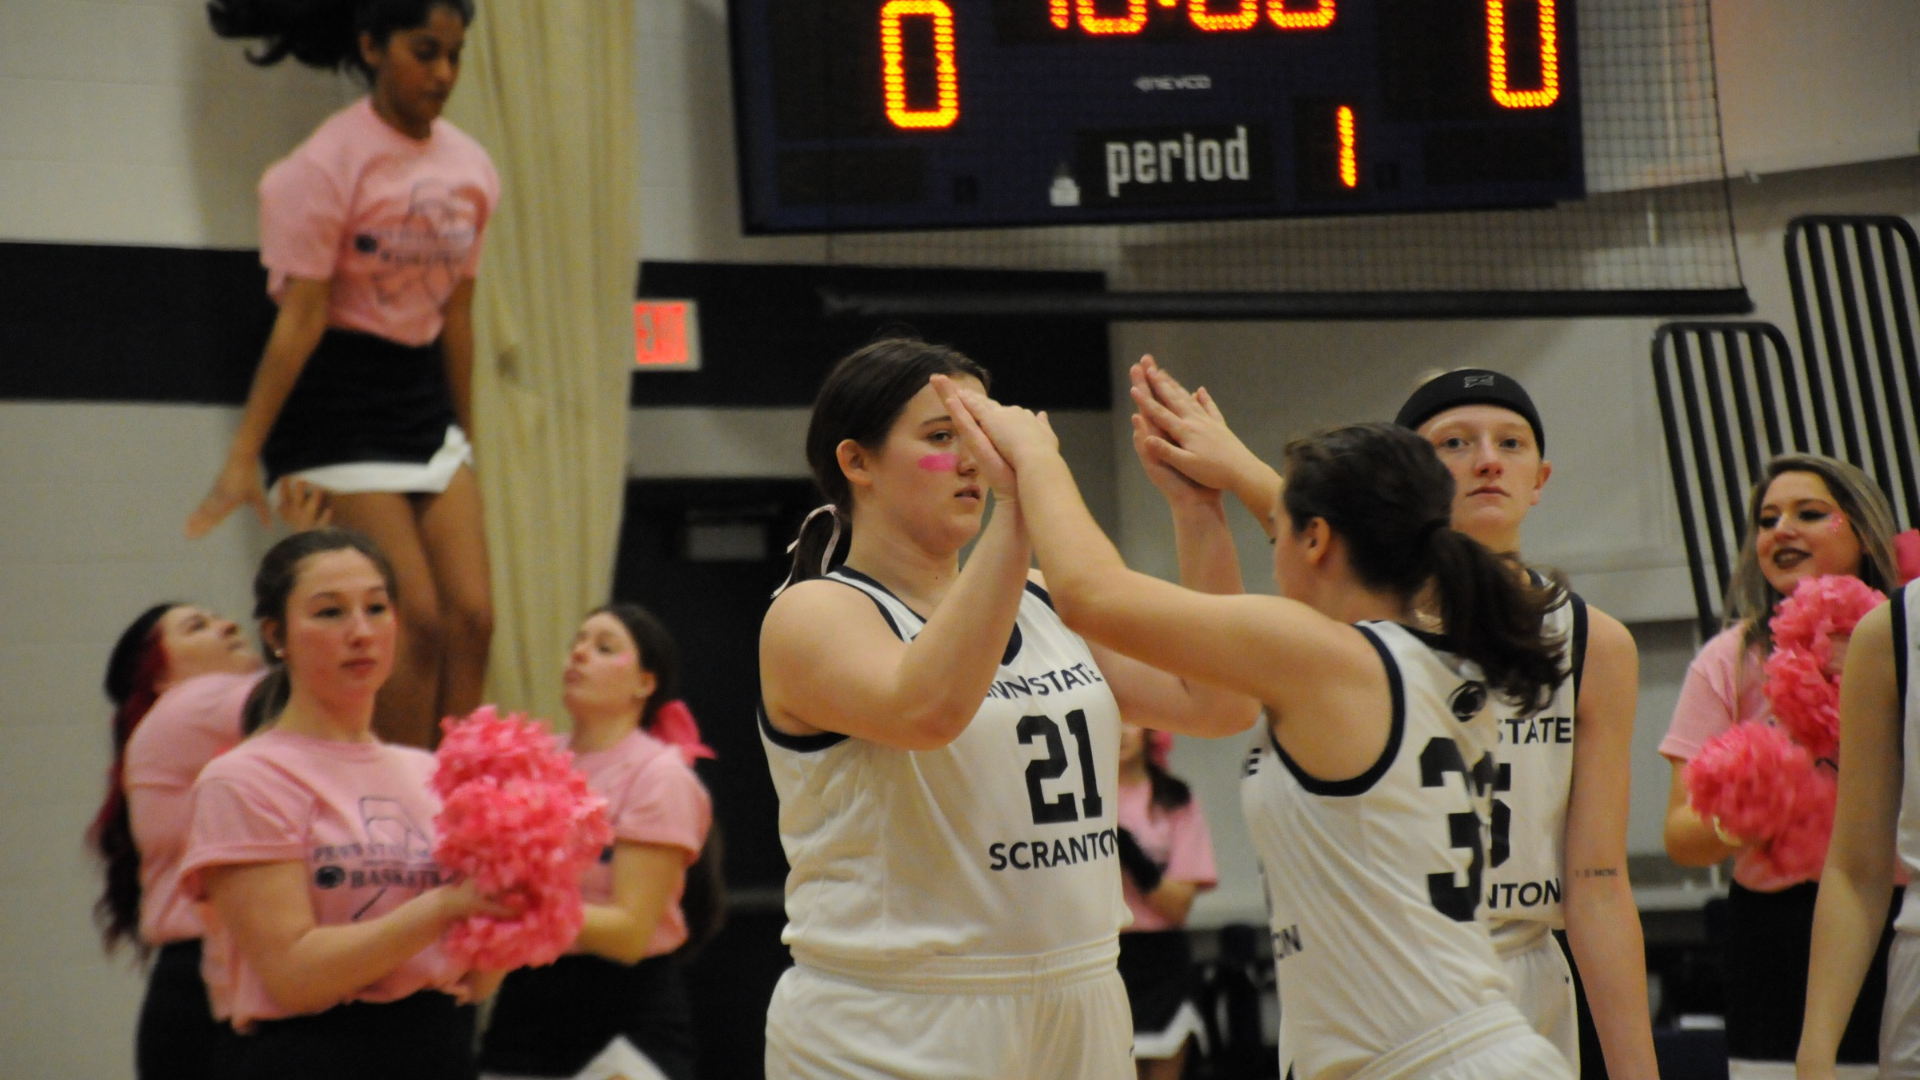 The Scranton Lady Lions line up hosted their Annual Pink Zone game this week.